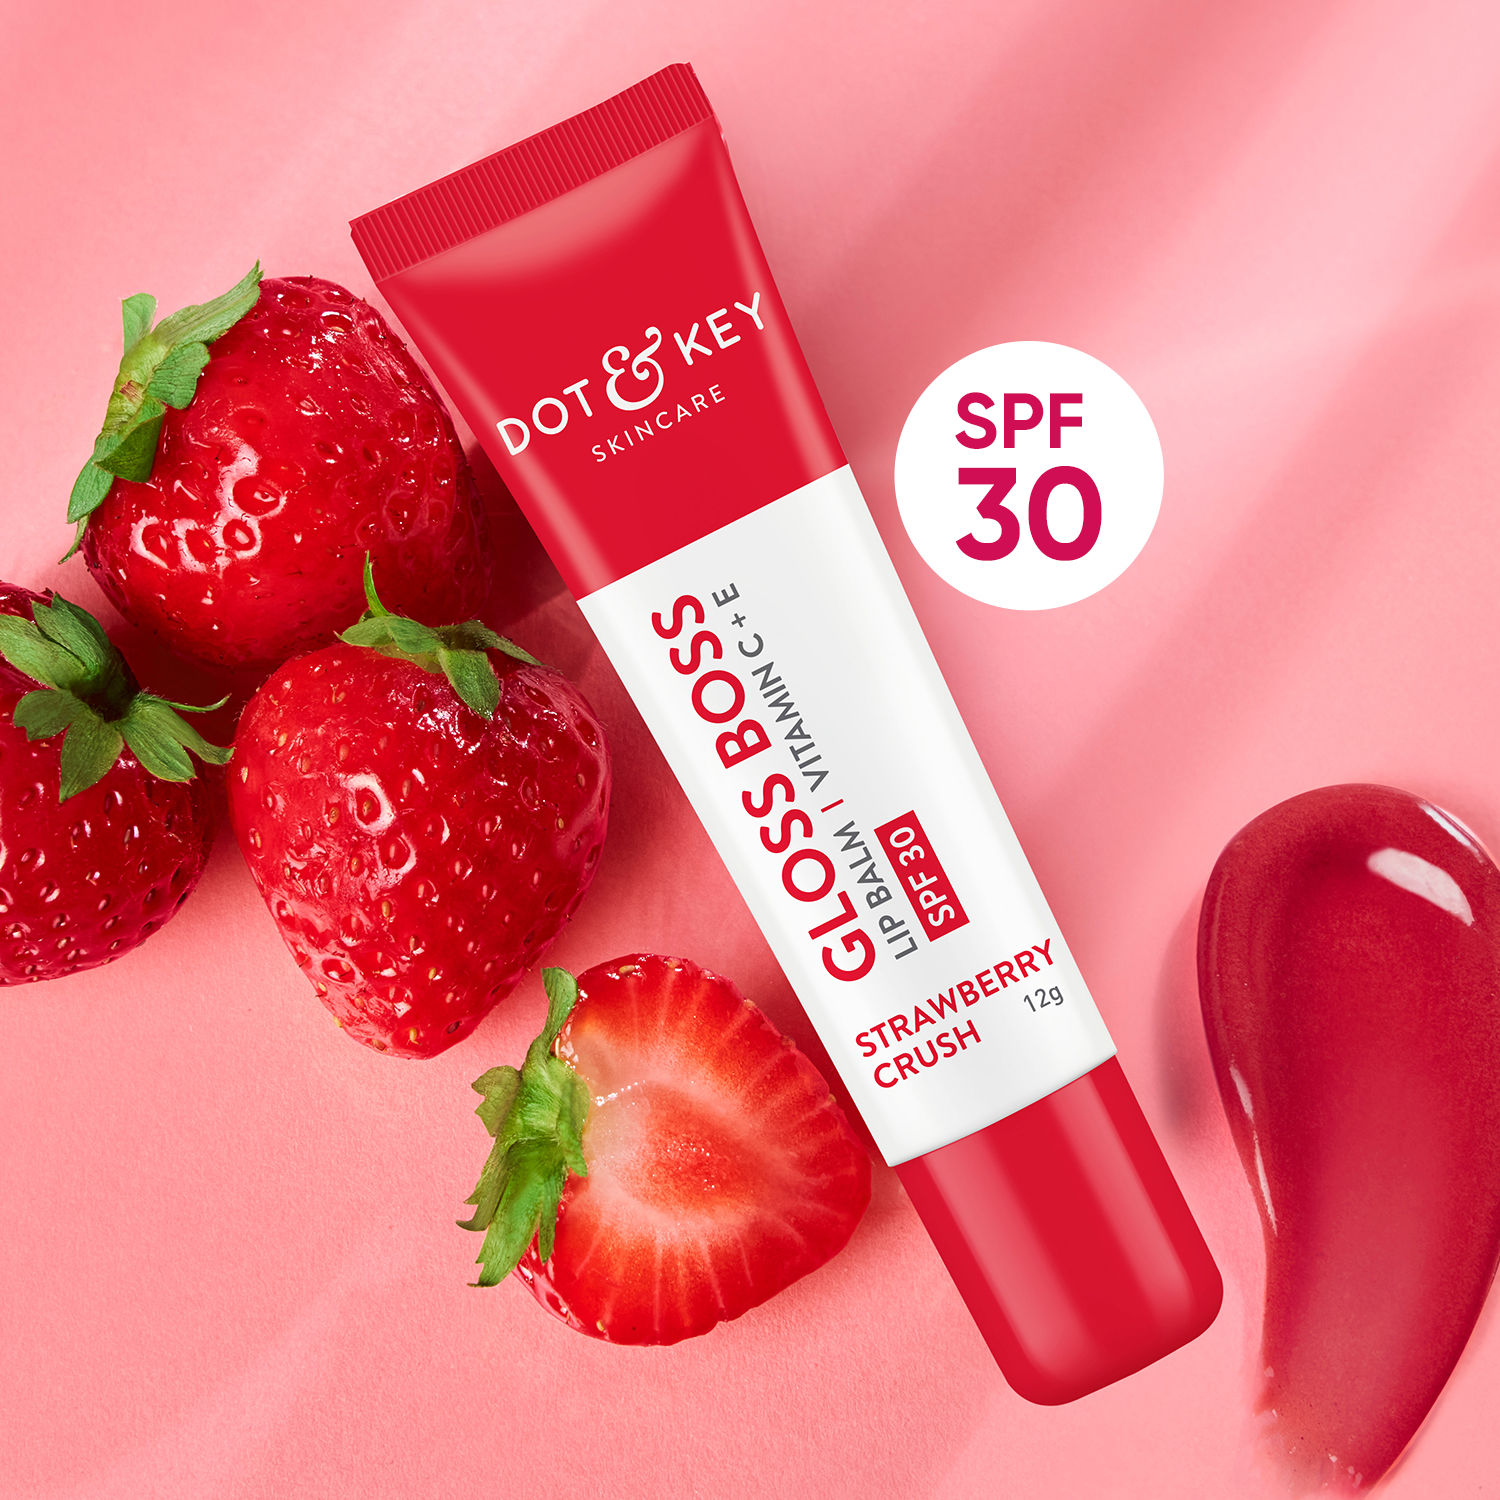 Dot & Key Strawberry Lip Balm for soft and naturally pink lips